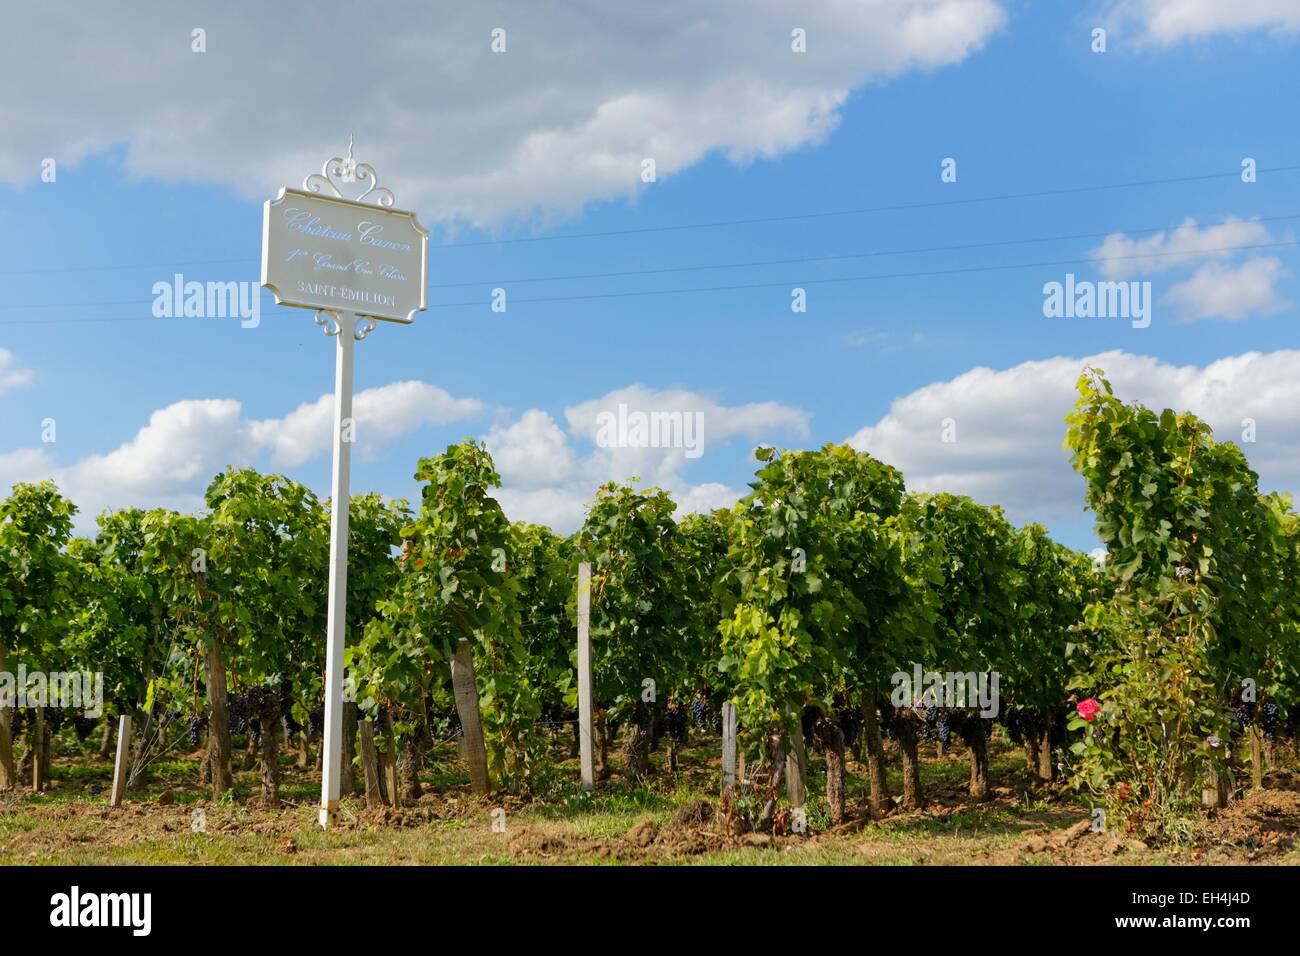 France, Gironde, Saint Emilion, listed as World Heritage by UNESCO, Bordeaux vineyard, vineyard of Chateau Canon, Premier Grand Cru Classe B (Classification of Saint Emilion wine as First Great Growths), AOC Saint Emilion Great Classified Growth Stock Photo